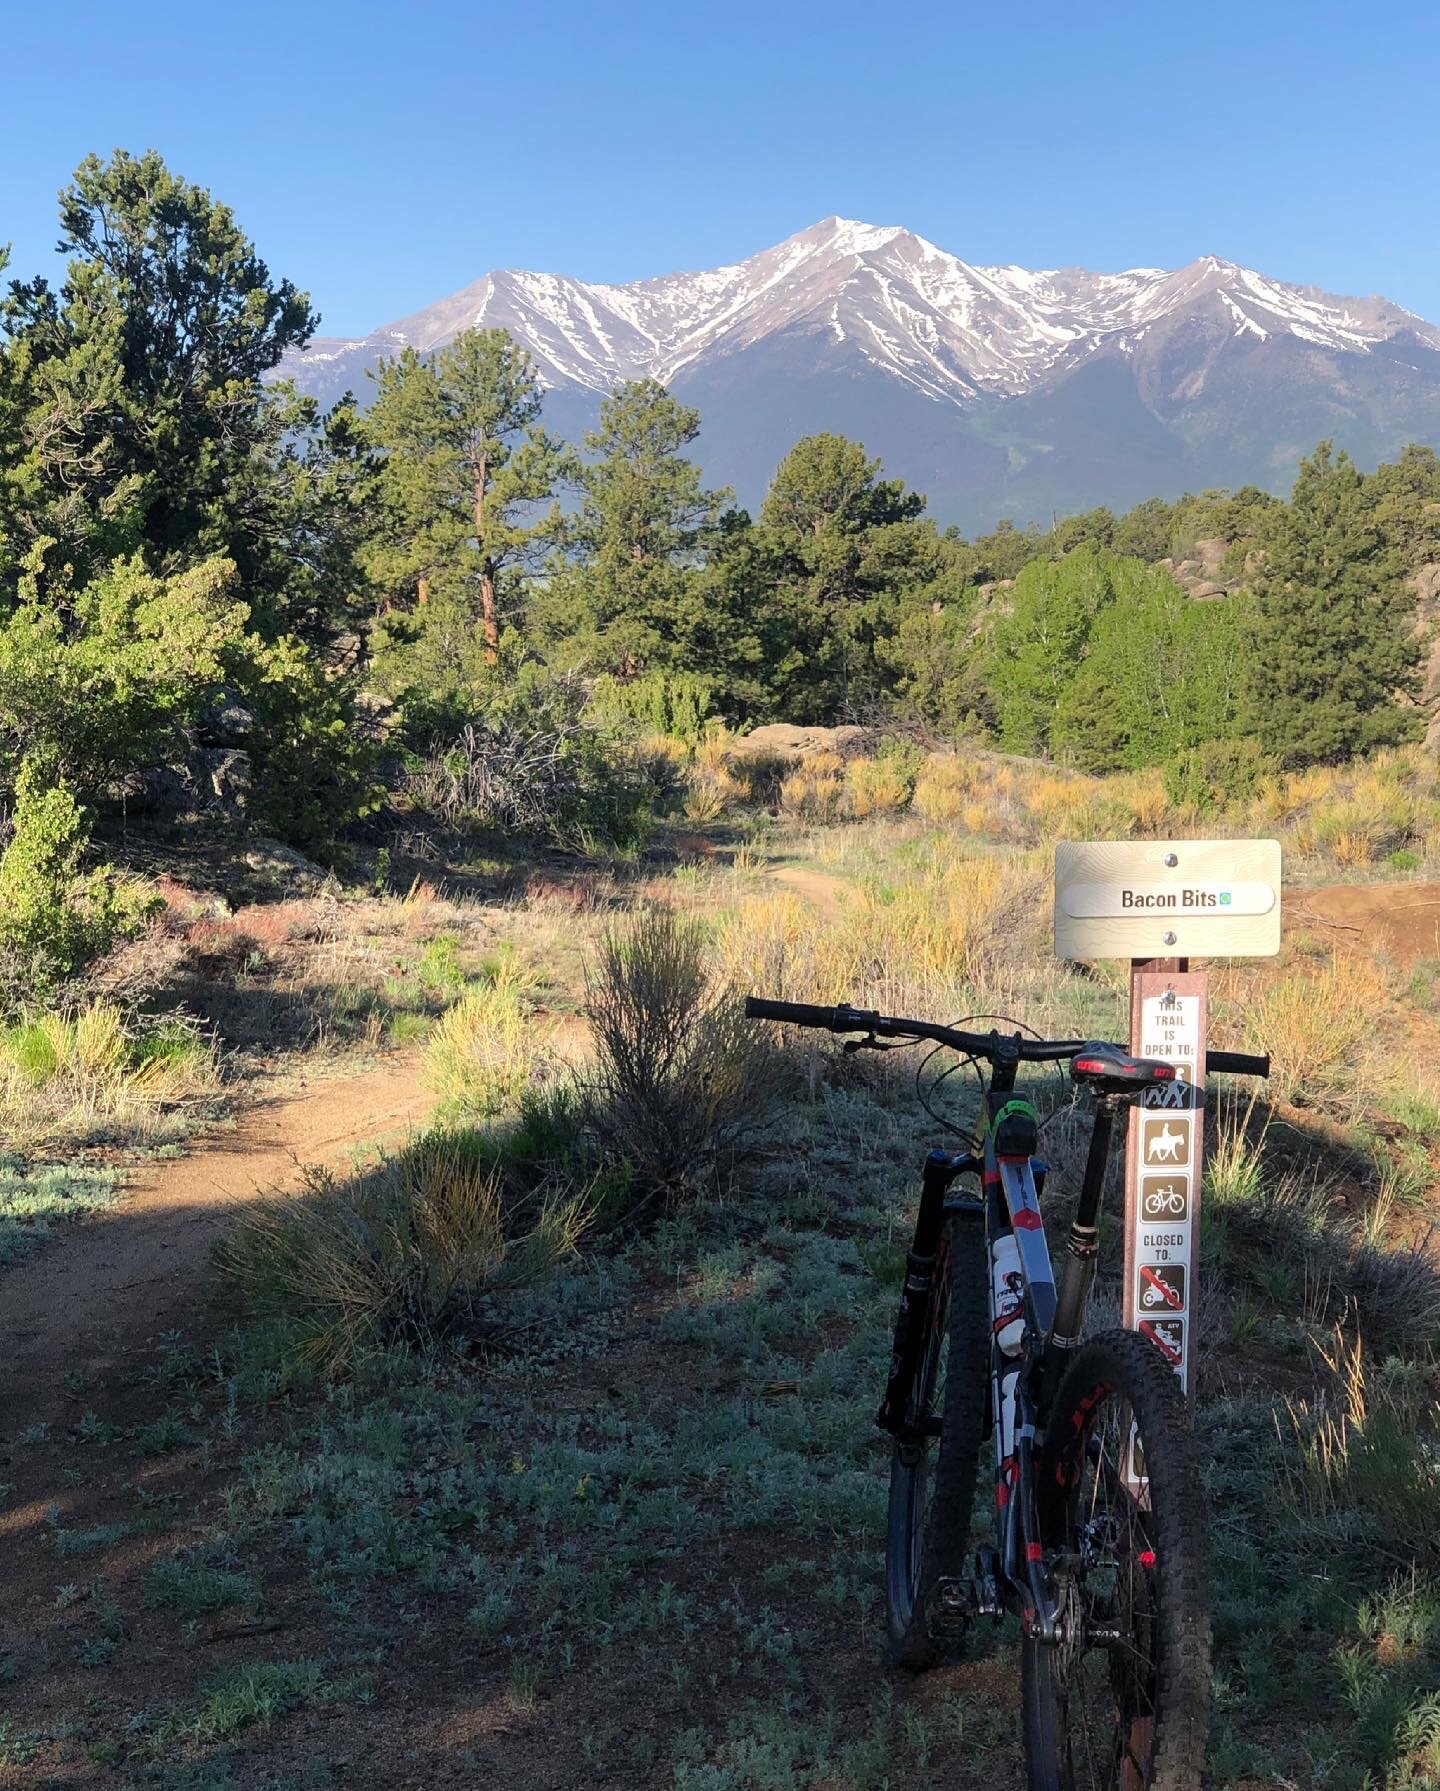 Who&rsquo;s ready to get back on the saddle?!

Our friends at Buena Vista Single Track Coalition have reported that trails are ready to go! That includes Bacon Bits, pictured here! Book a stay and hop on the Midland Trail system directly from our pro